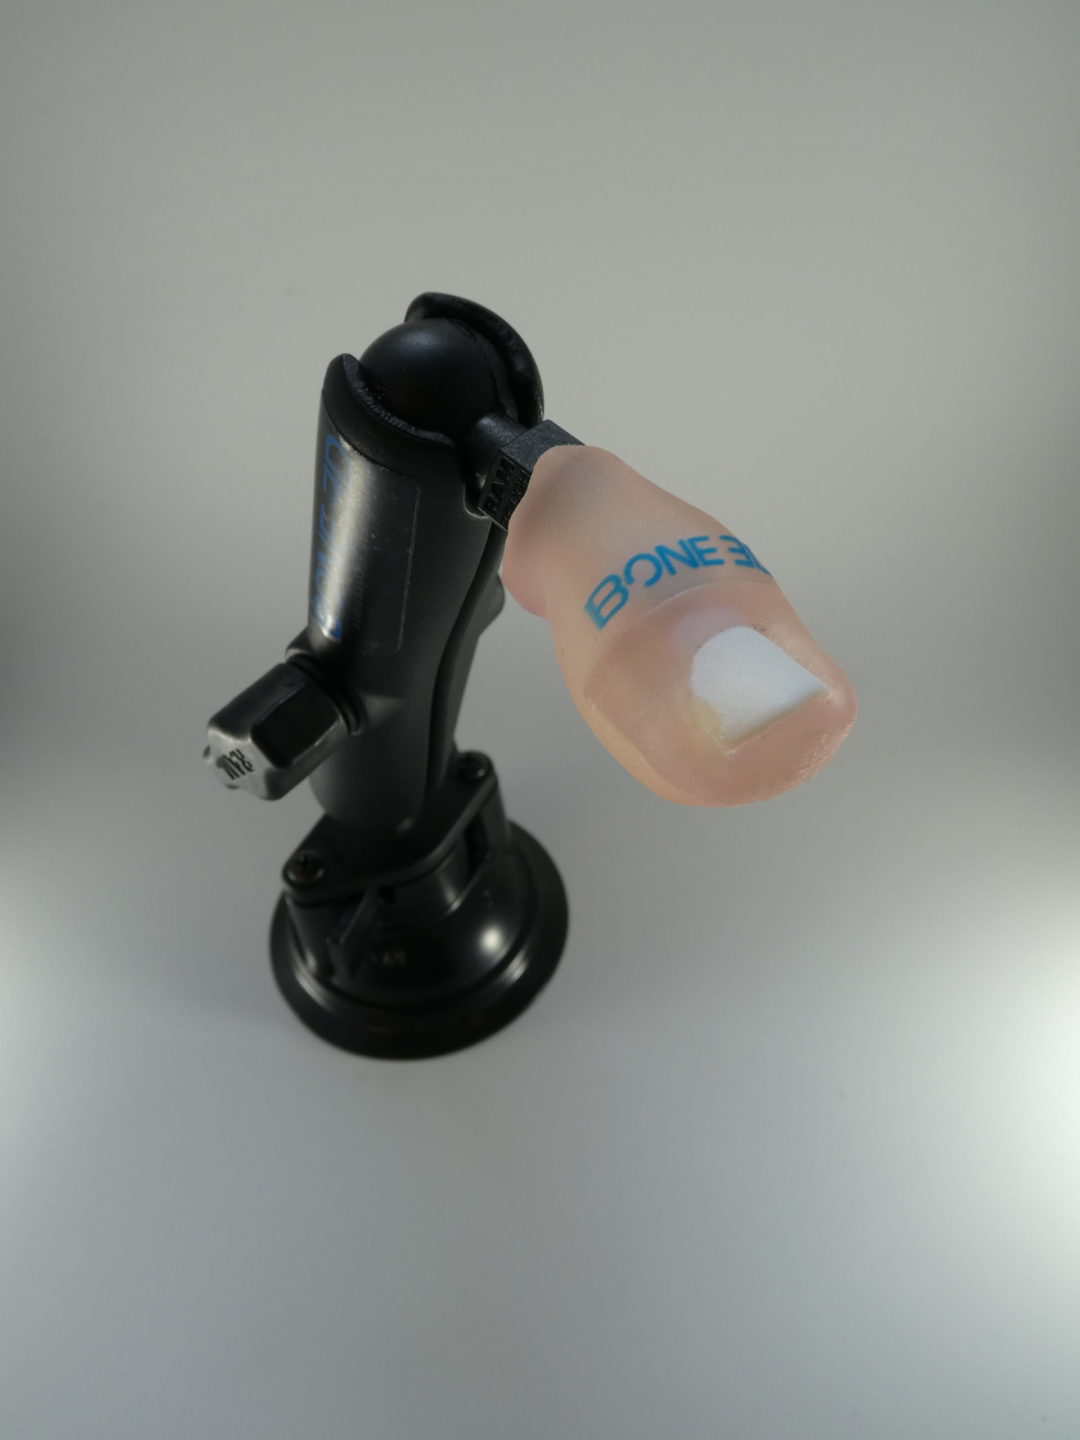 Podiatry simulator 3D printed on articulated arm